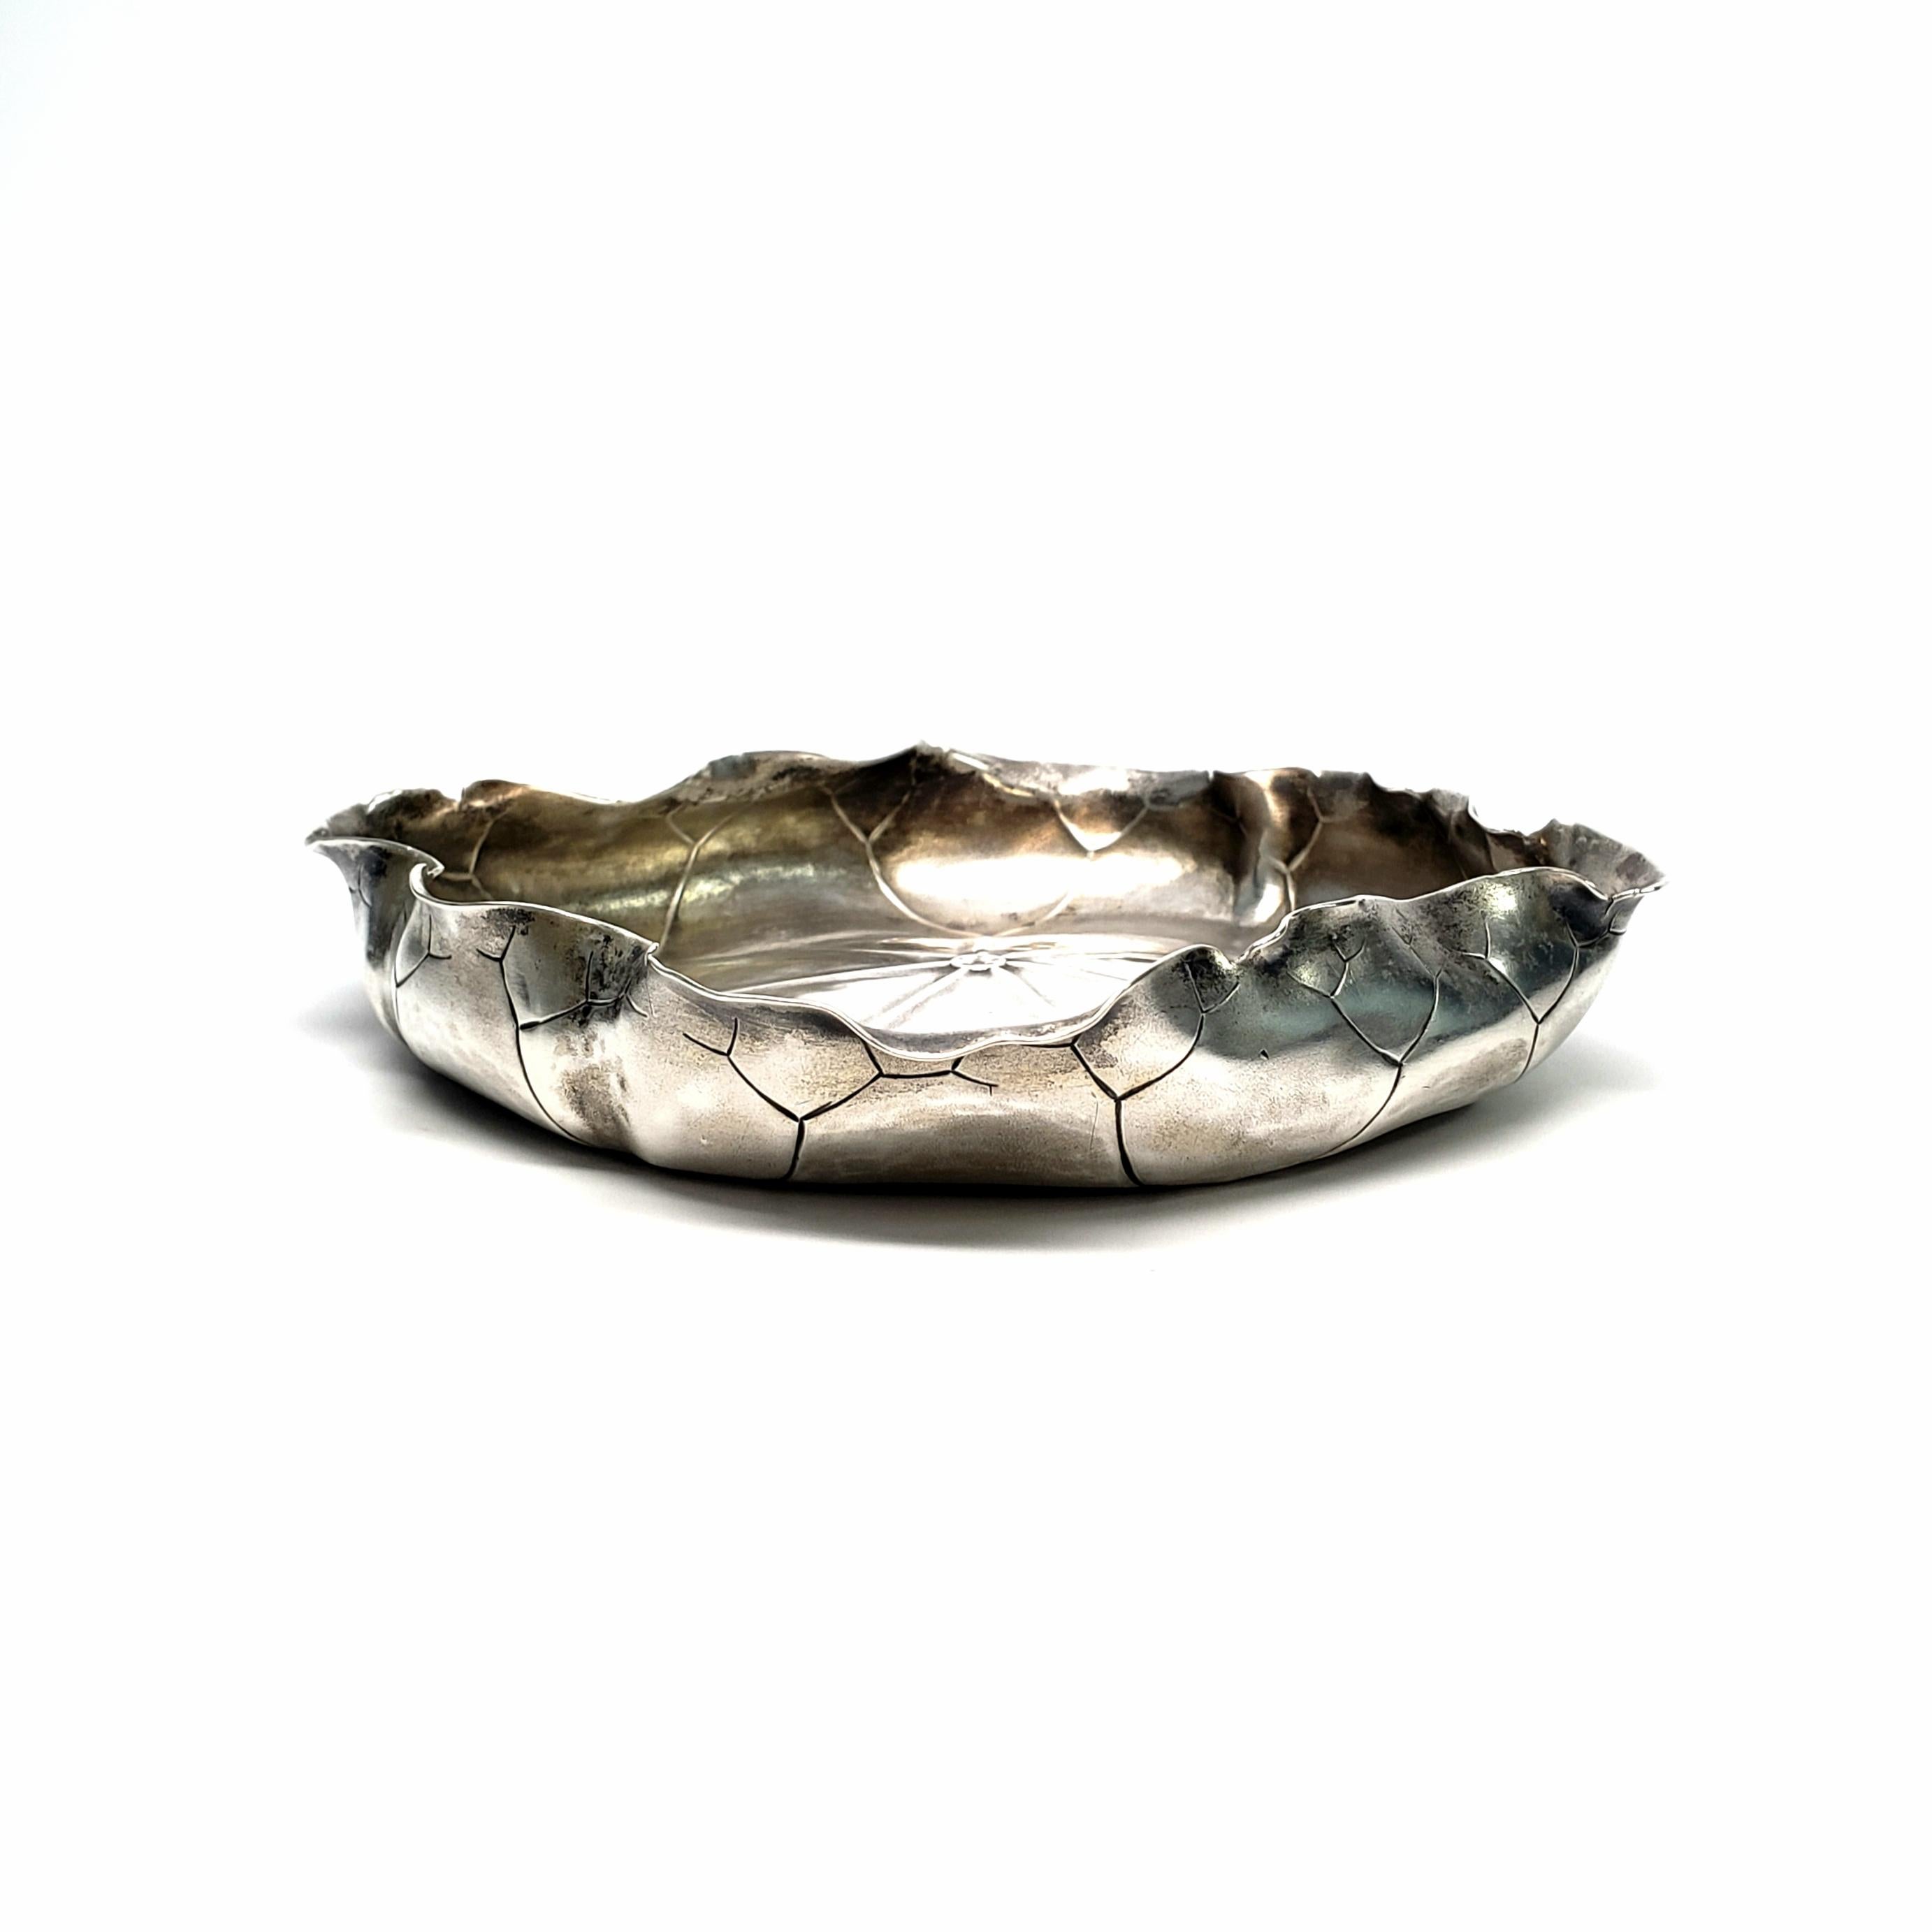 Women's or Men's George W Shiebler & Co Sterling Silver Lily Pad Bowl